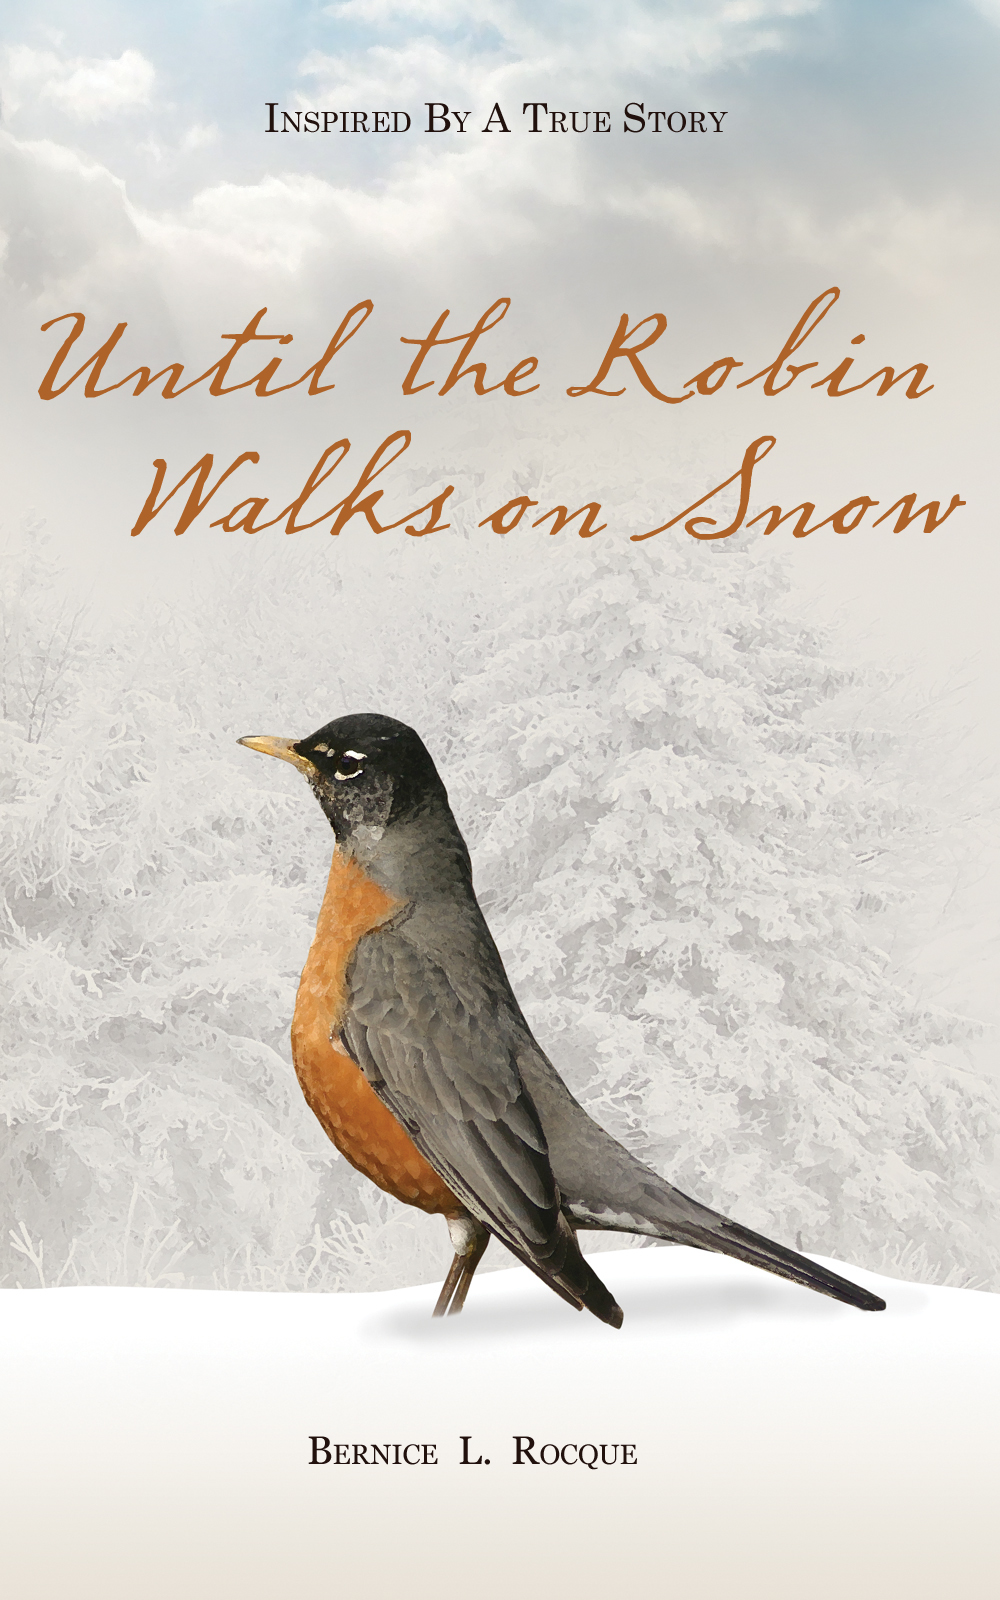 9780985682200 Until the Robin Walks on Snow COVER 1000x1600 - sized 30 percent copy